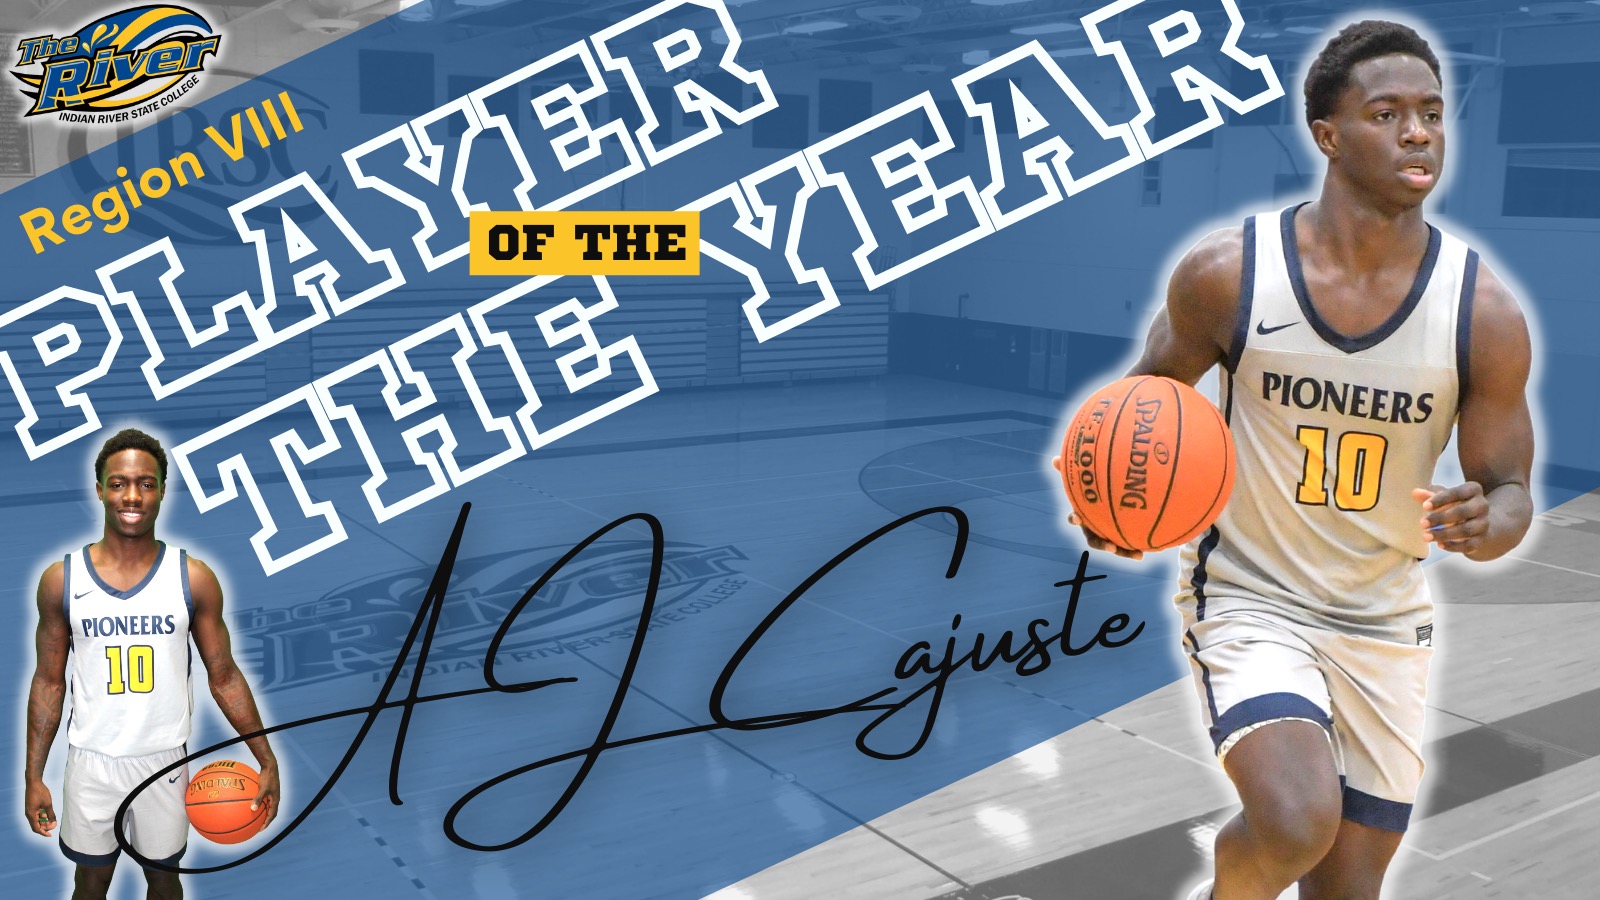 A.J. Cajuste Player of the Year, Charlie Wilson Coach of the Year, 7 Players Honored